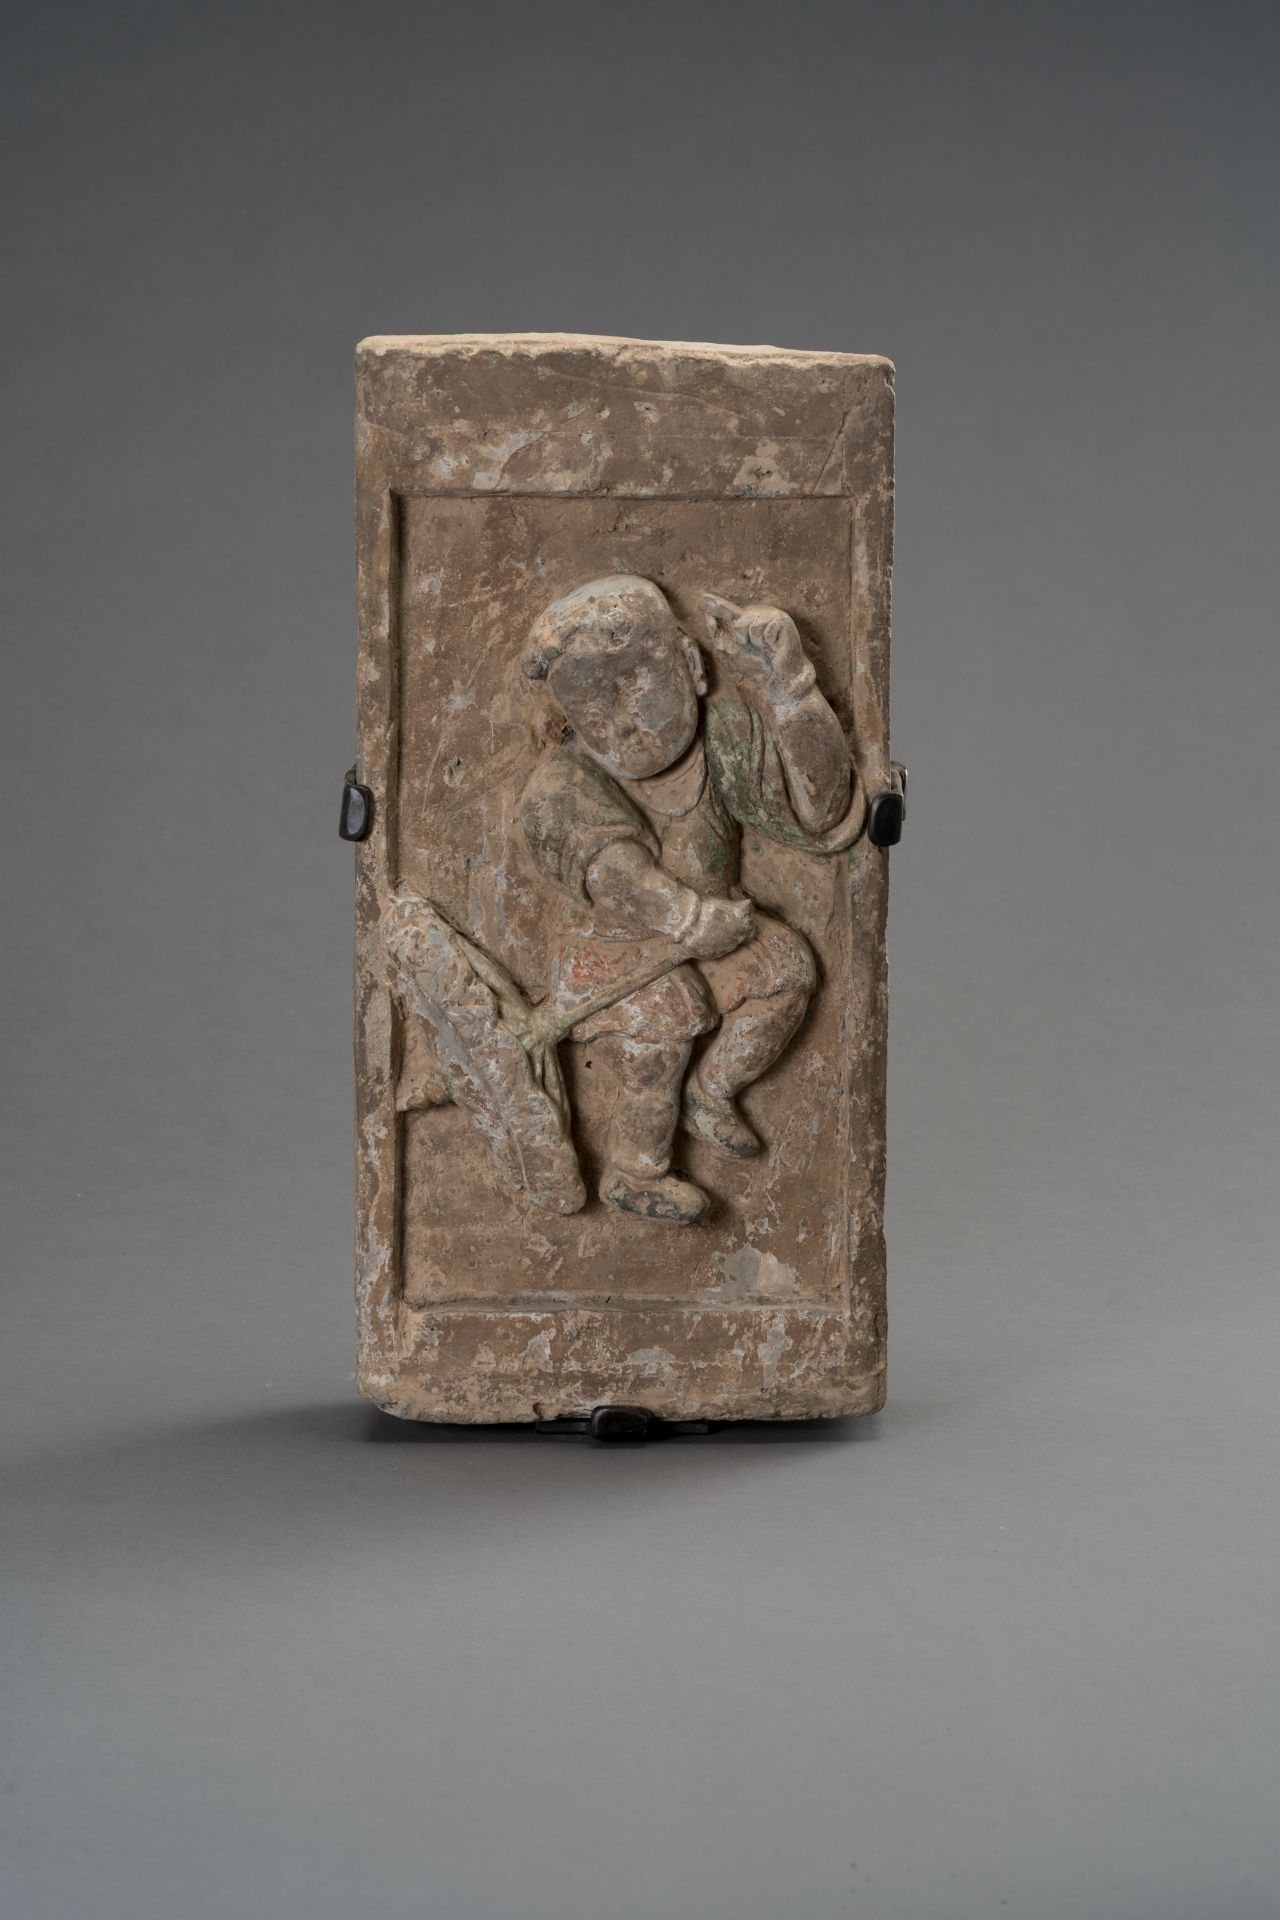 A TERRACOTTA WALL BRICK DEPICTING A CHILD WITH UMBRELLA, SONG DYNASTY